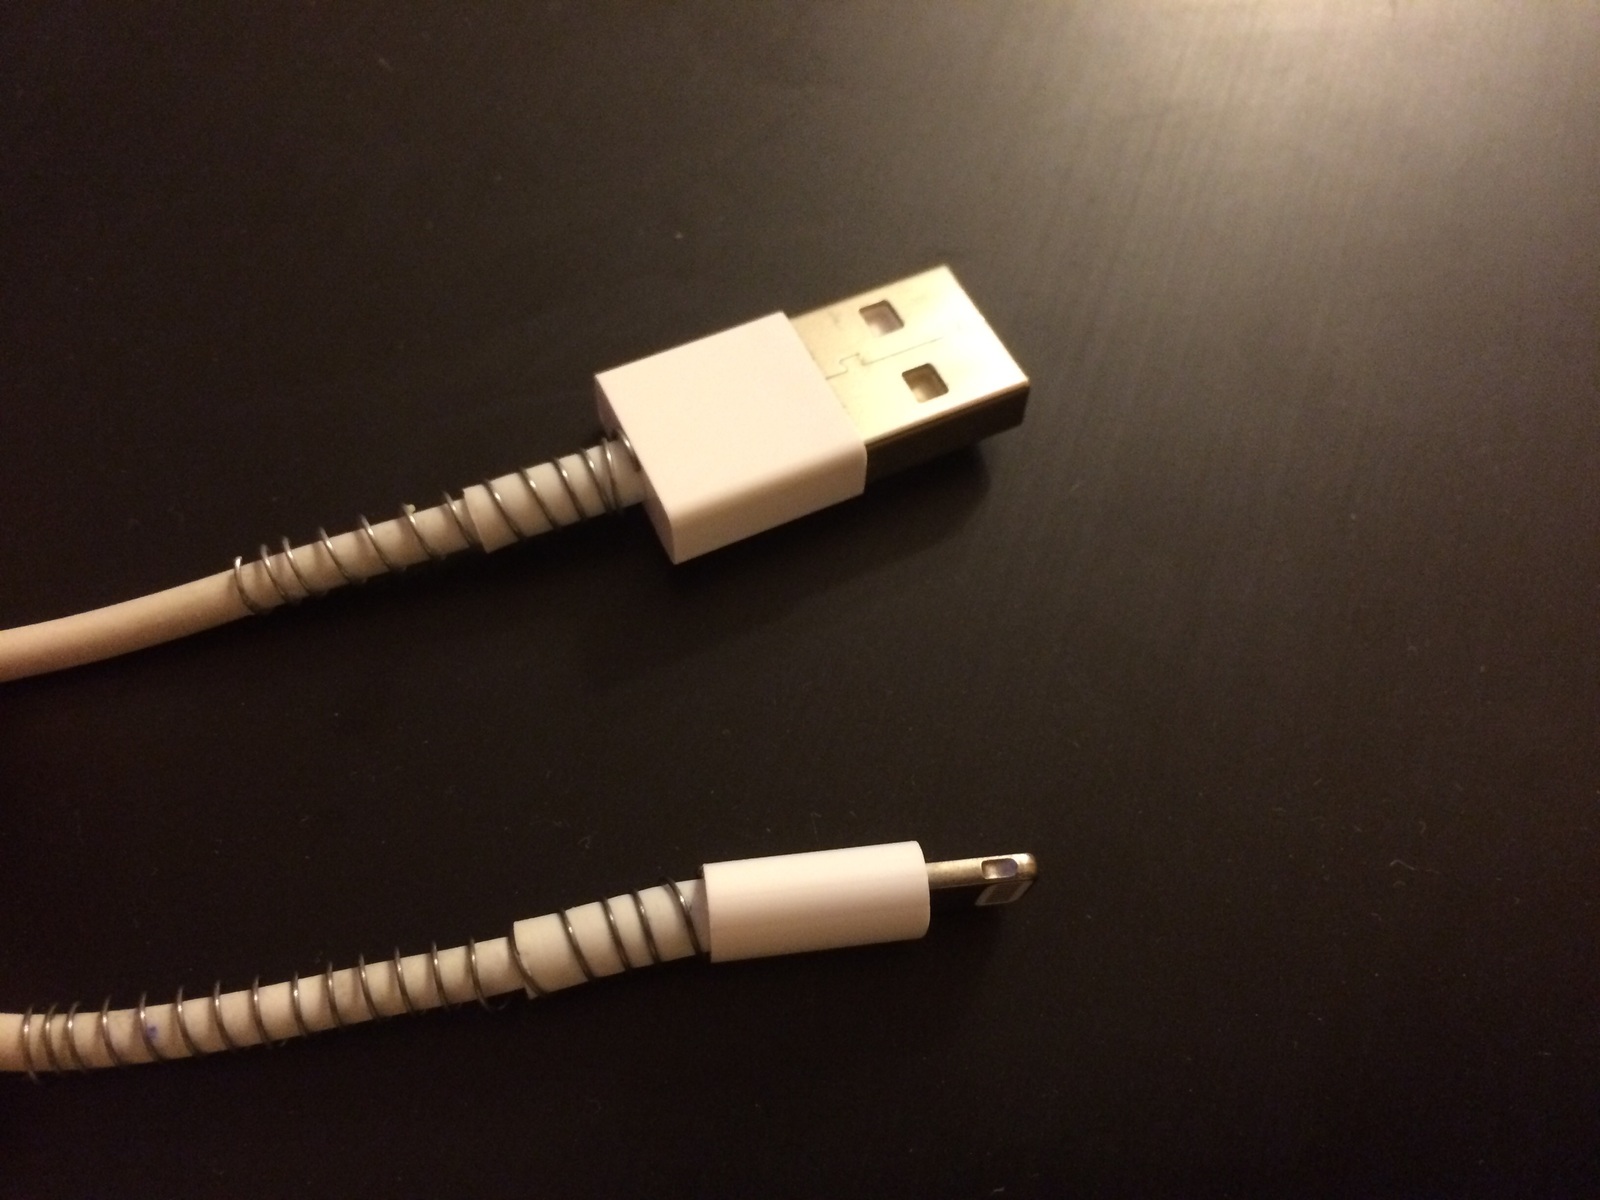 How to fix a charger from iPhone 5S, 5, 4, wire 